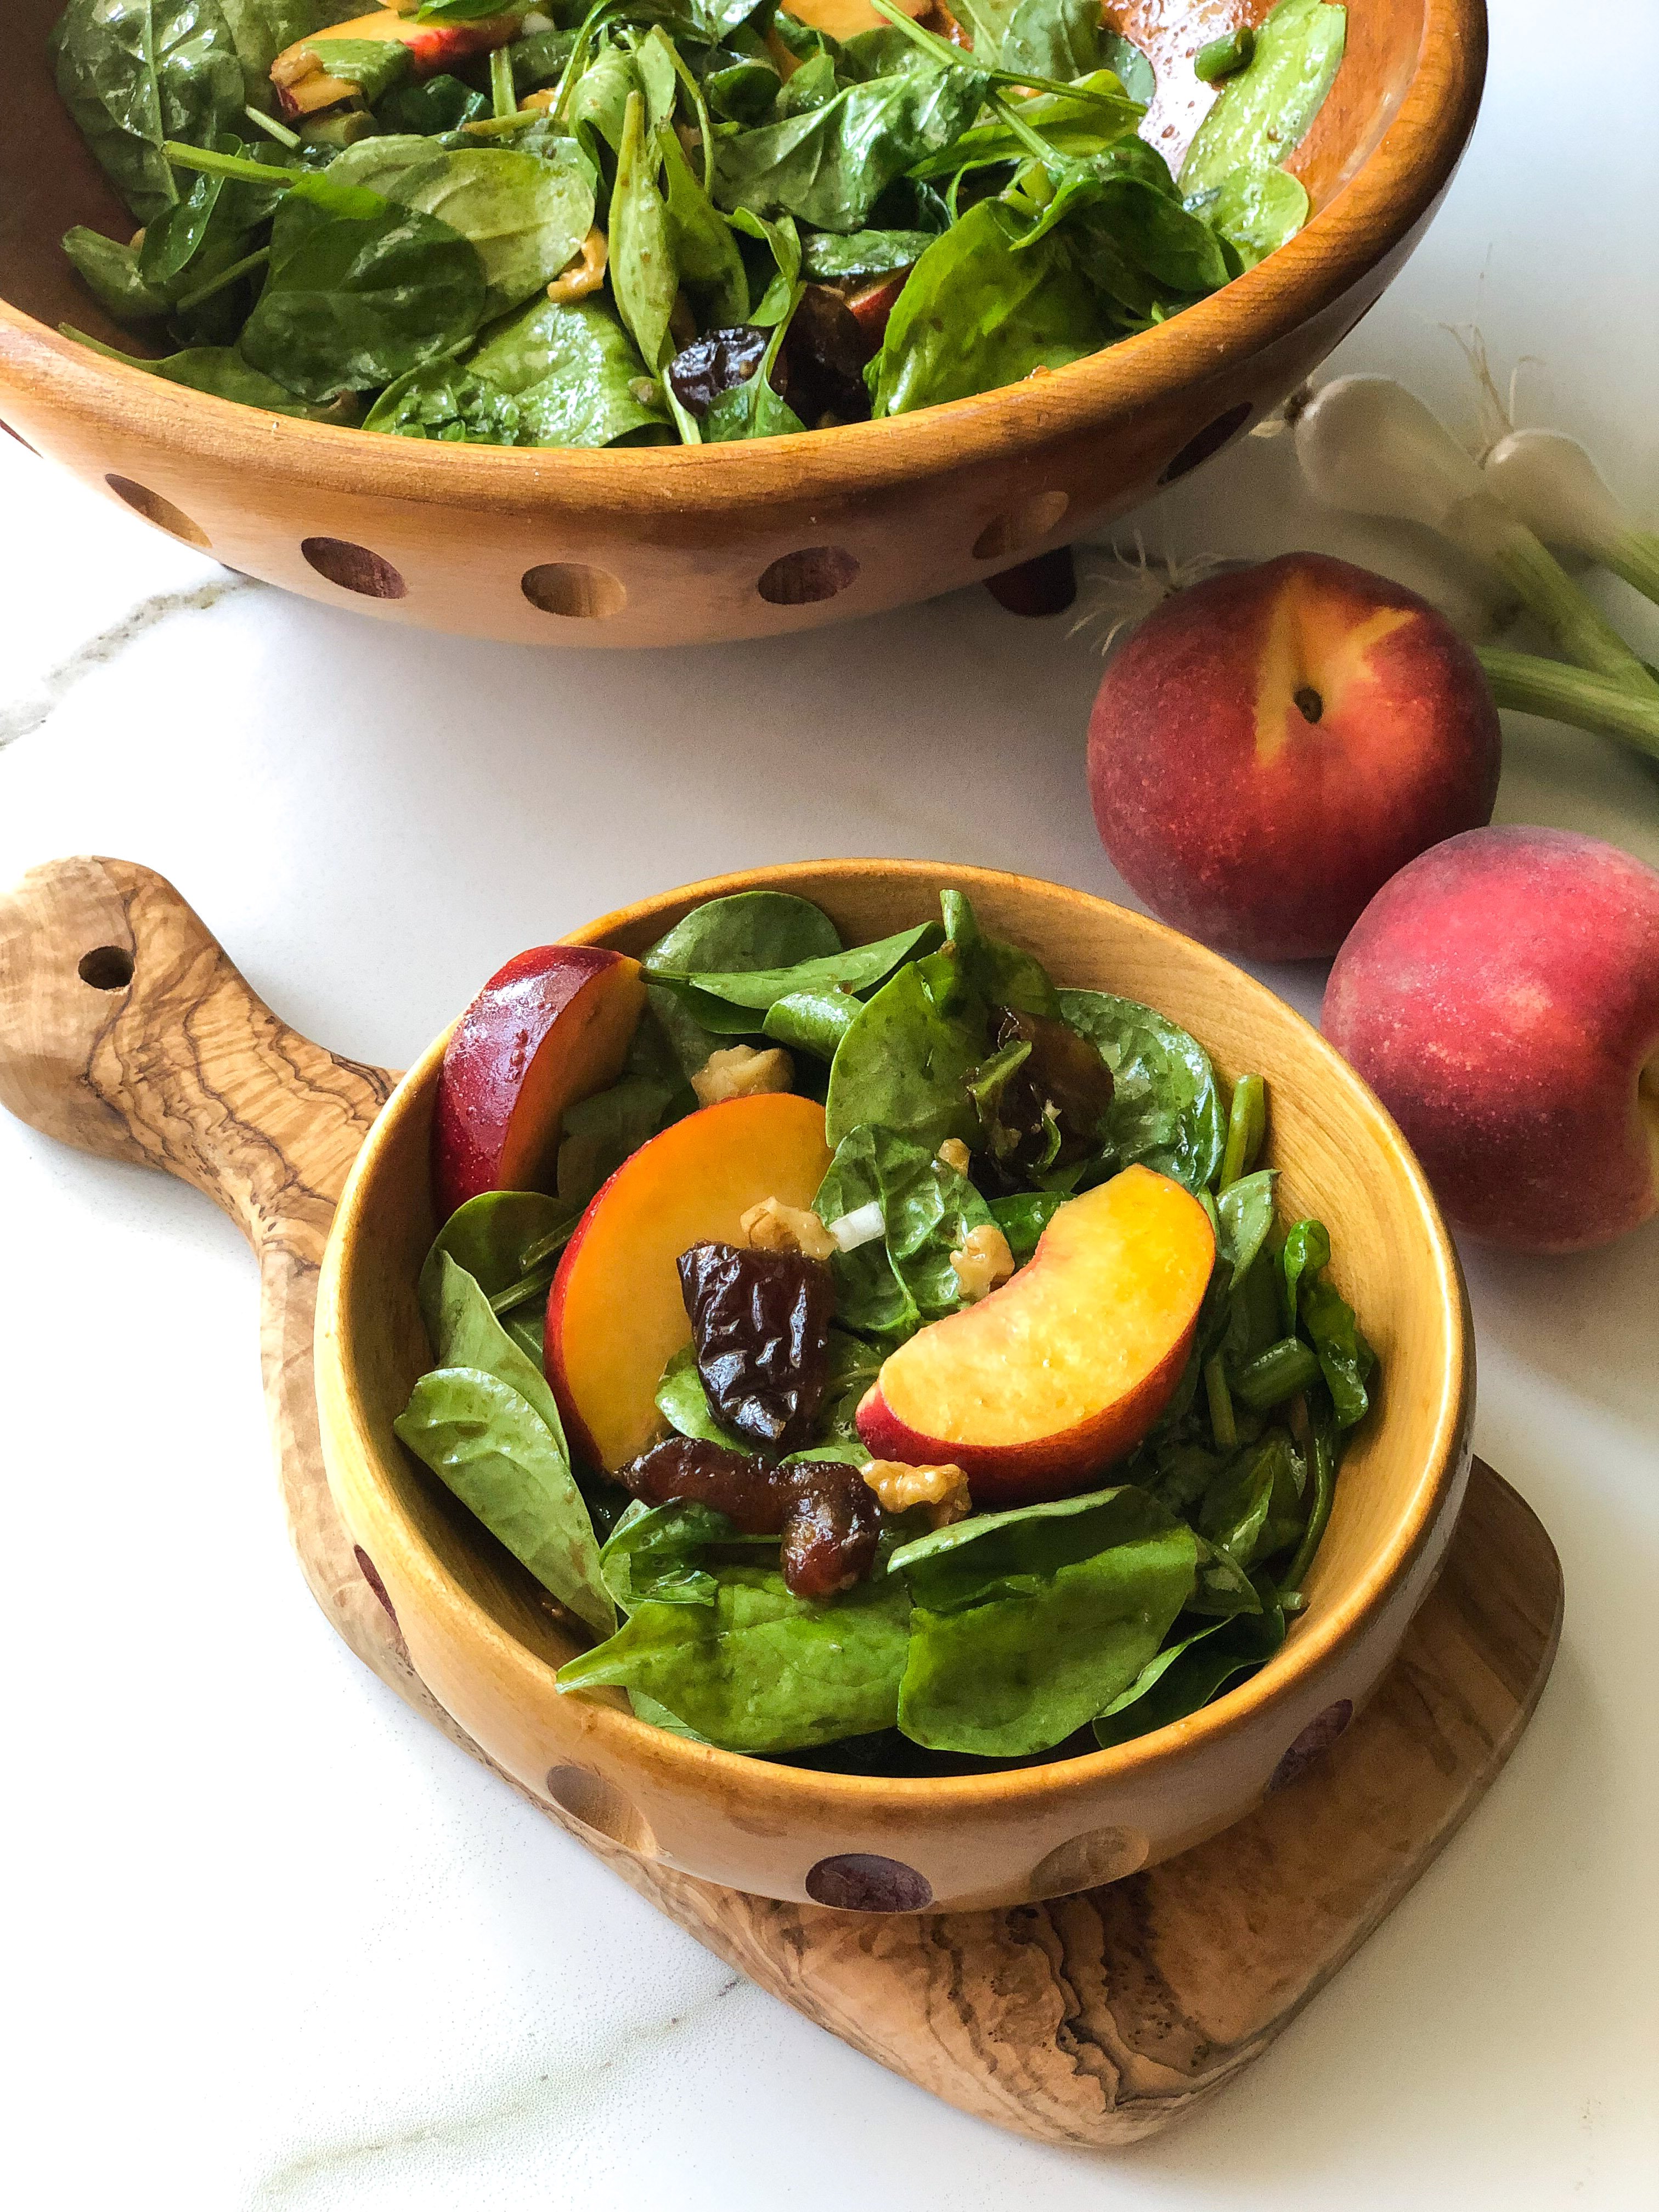 Spinach salad with peaches and dates